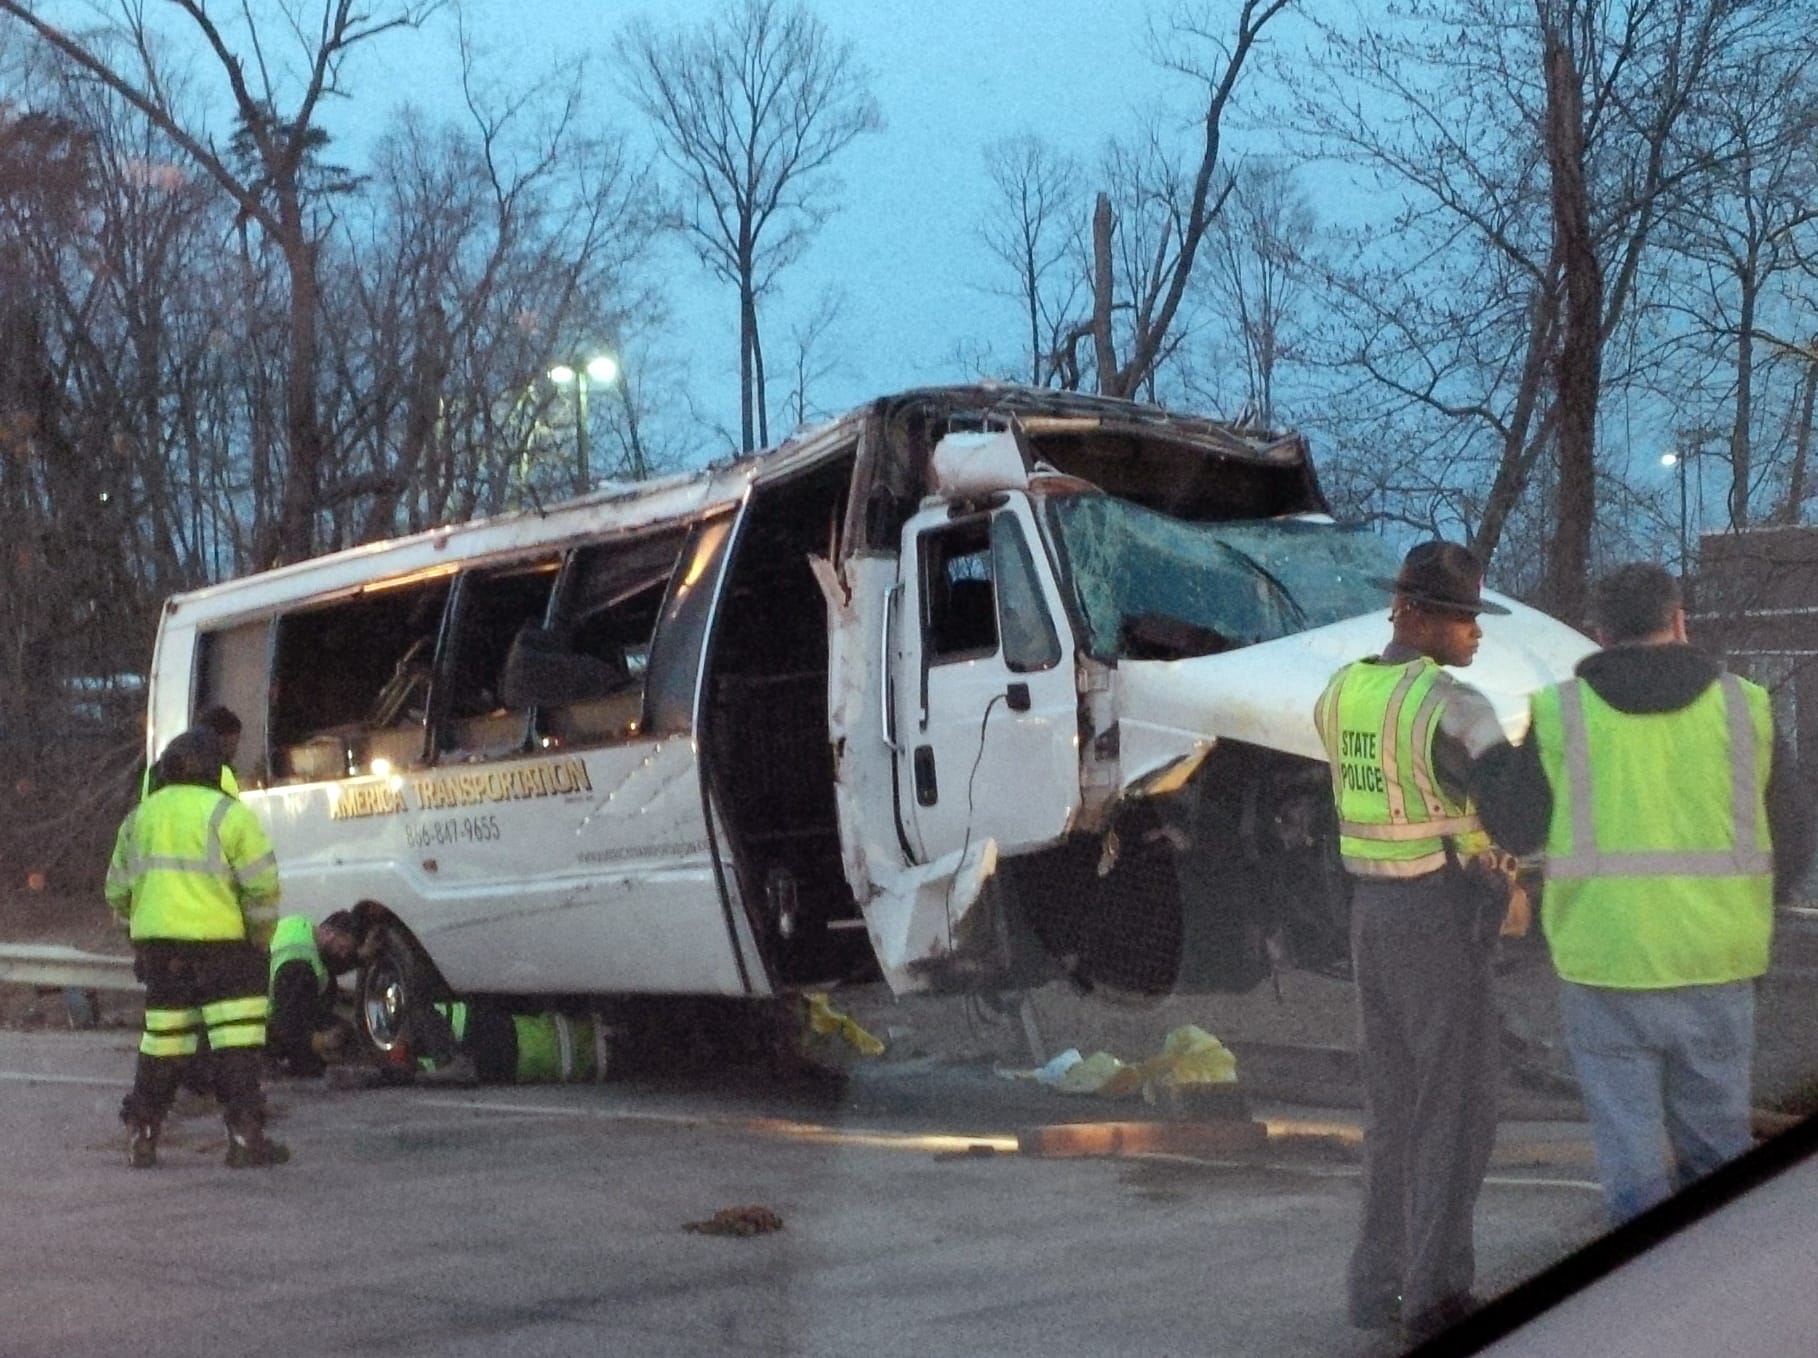 Virginia State Police
Police investigate the scene of a bus accident on Interstate 95 in Fairfax County, Va. The shuttle bus struck a guardrail and overturned before dawn Sunday.